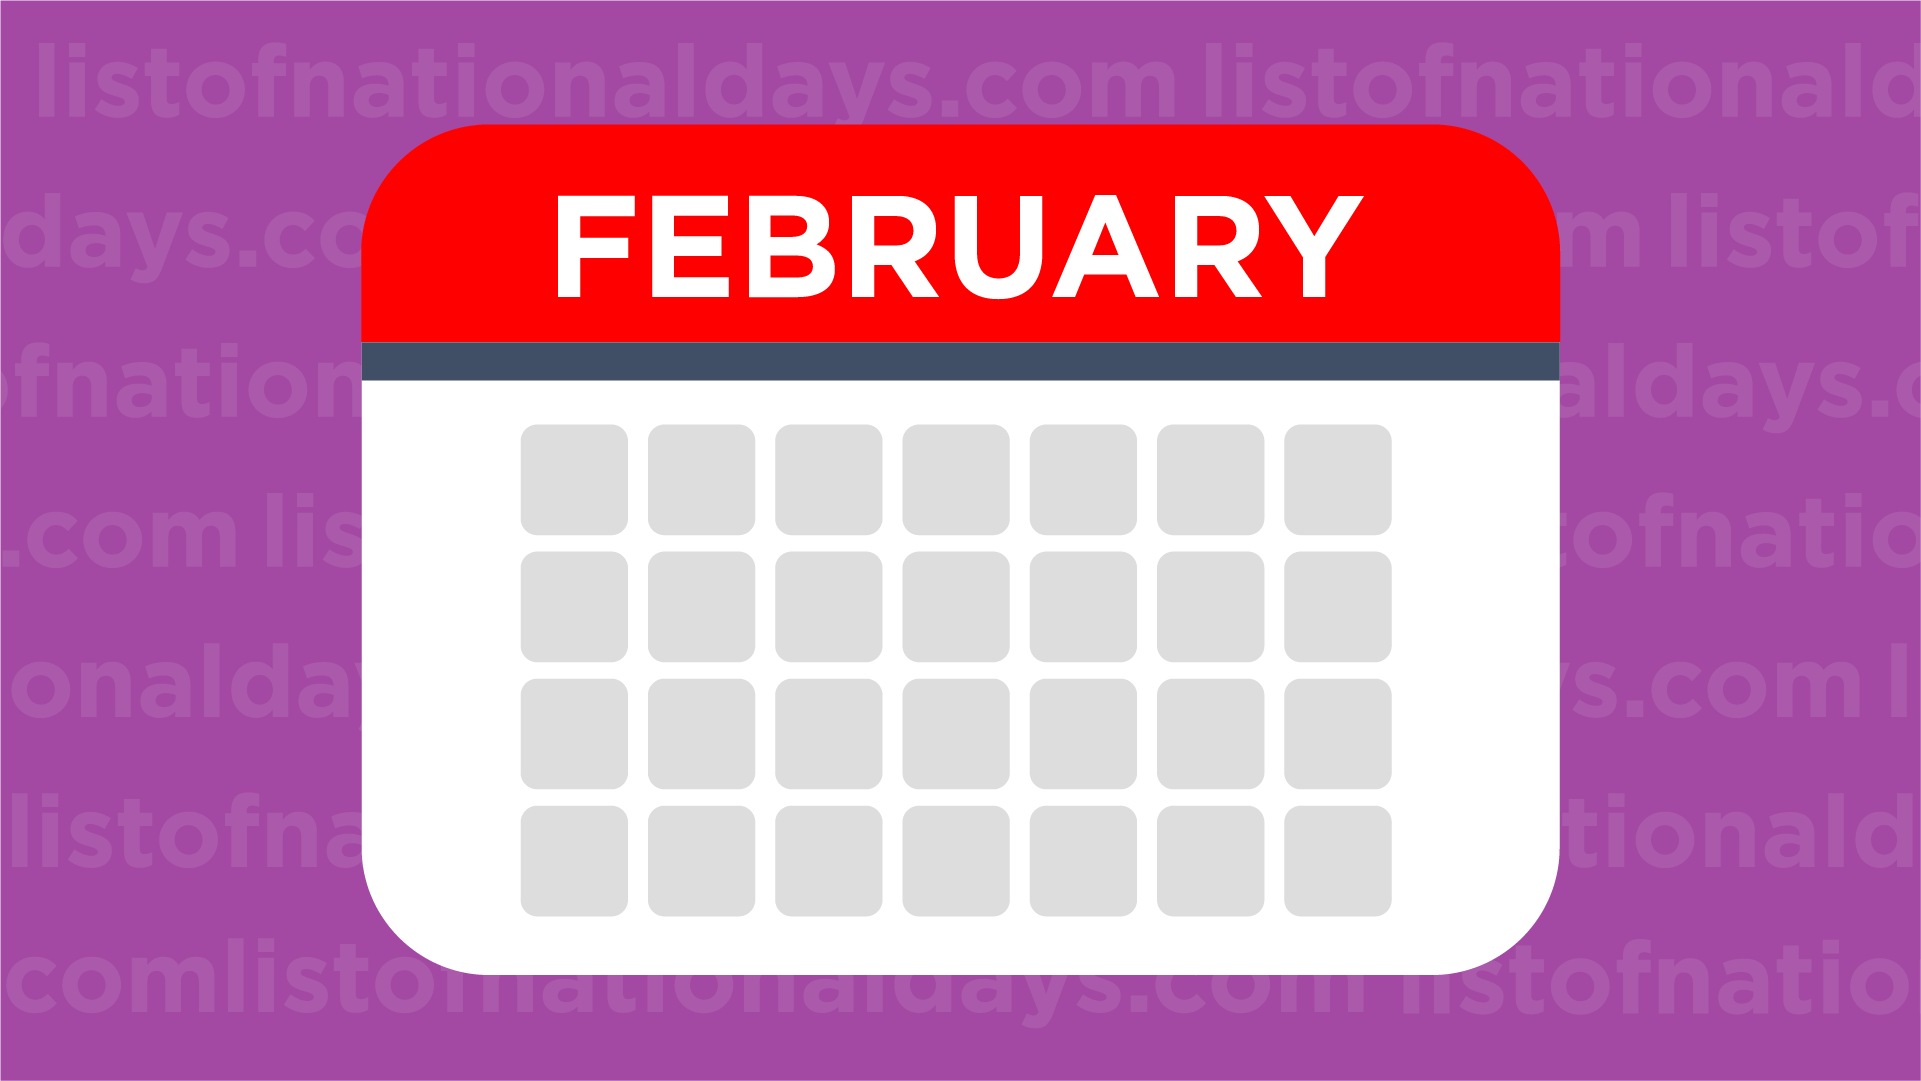 february-national-days-list-of-national-days